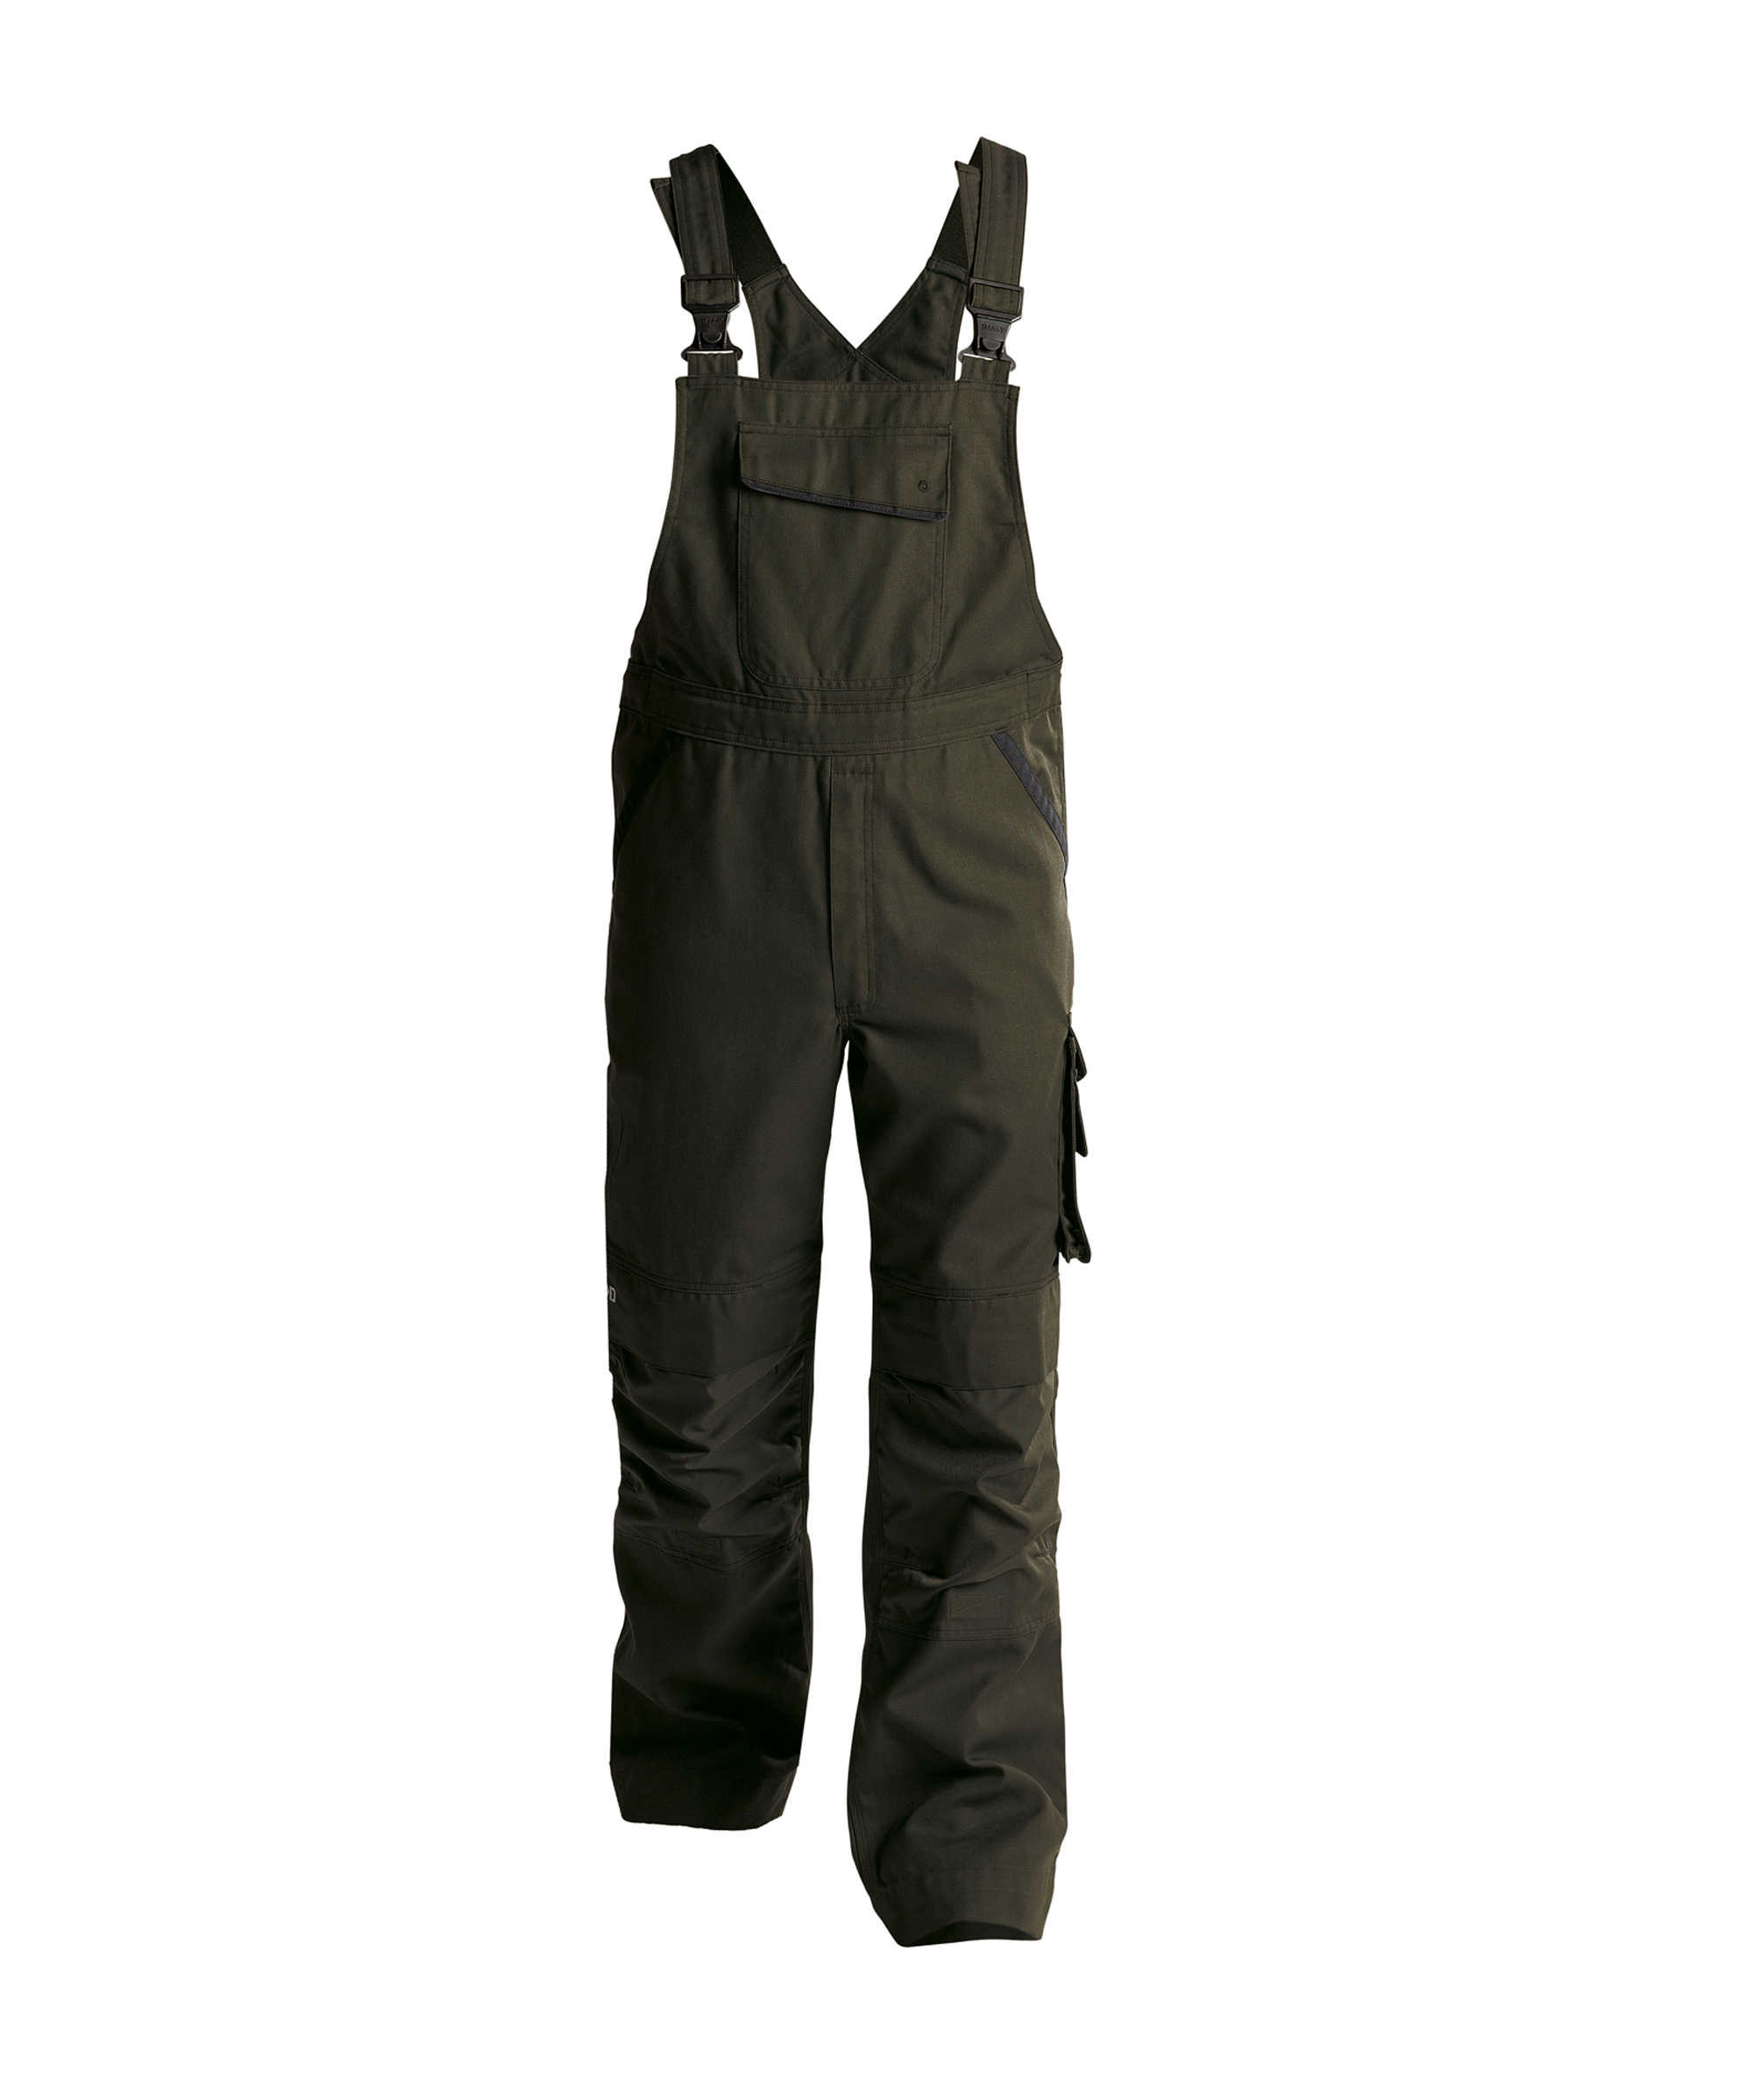 bolt_canvas-brace-overall-with-knee-pockets_olive-green-black_front.jpg